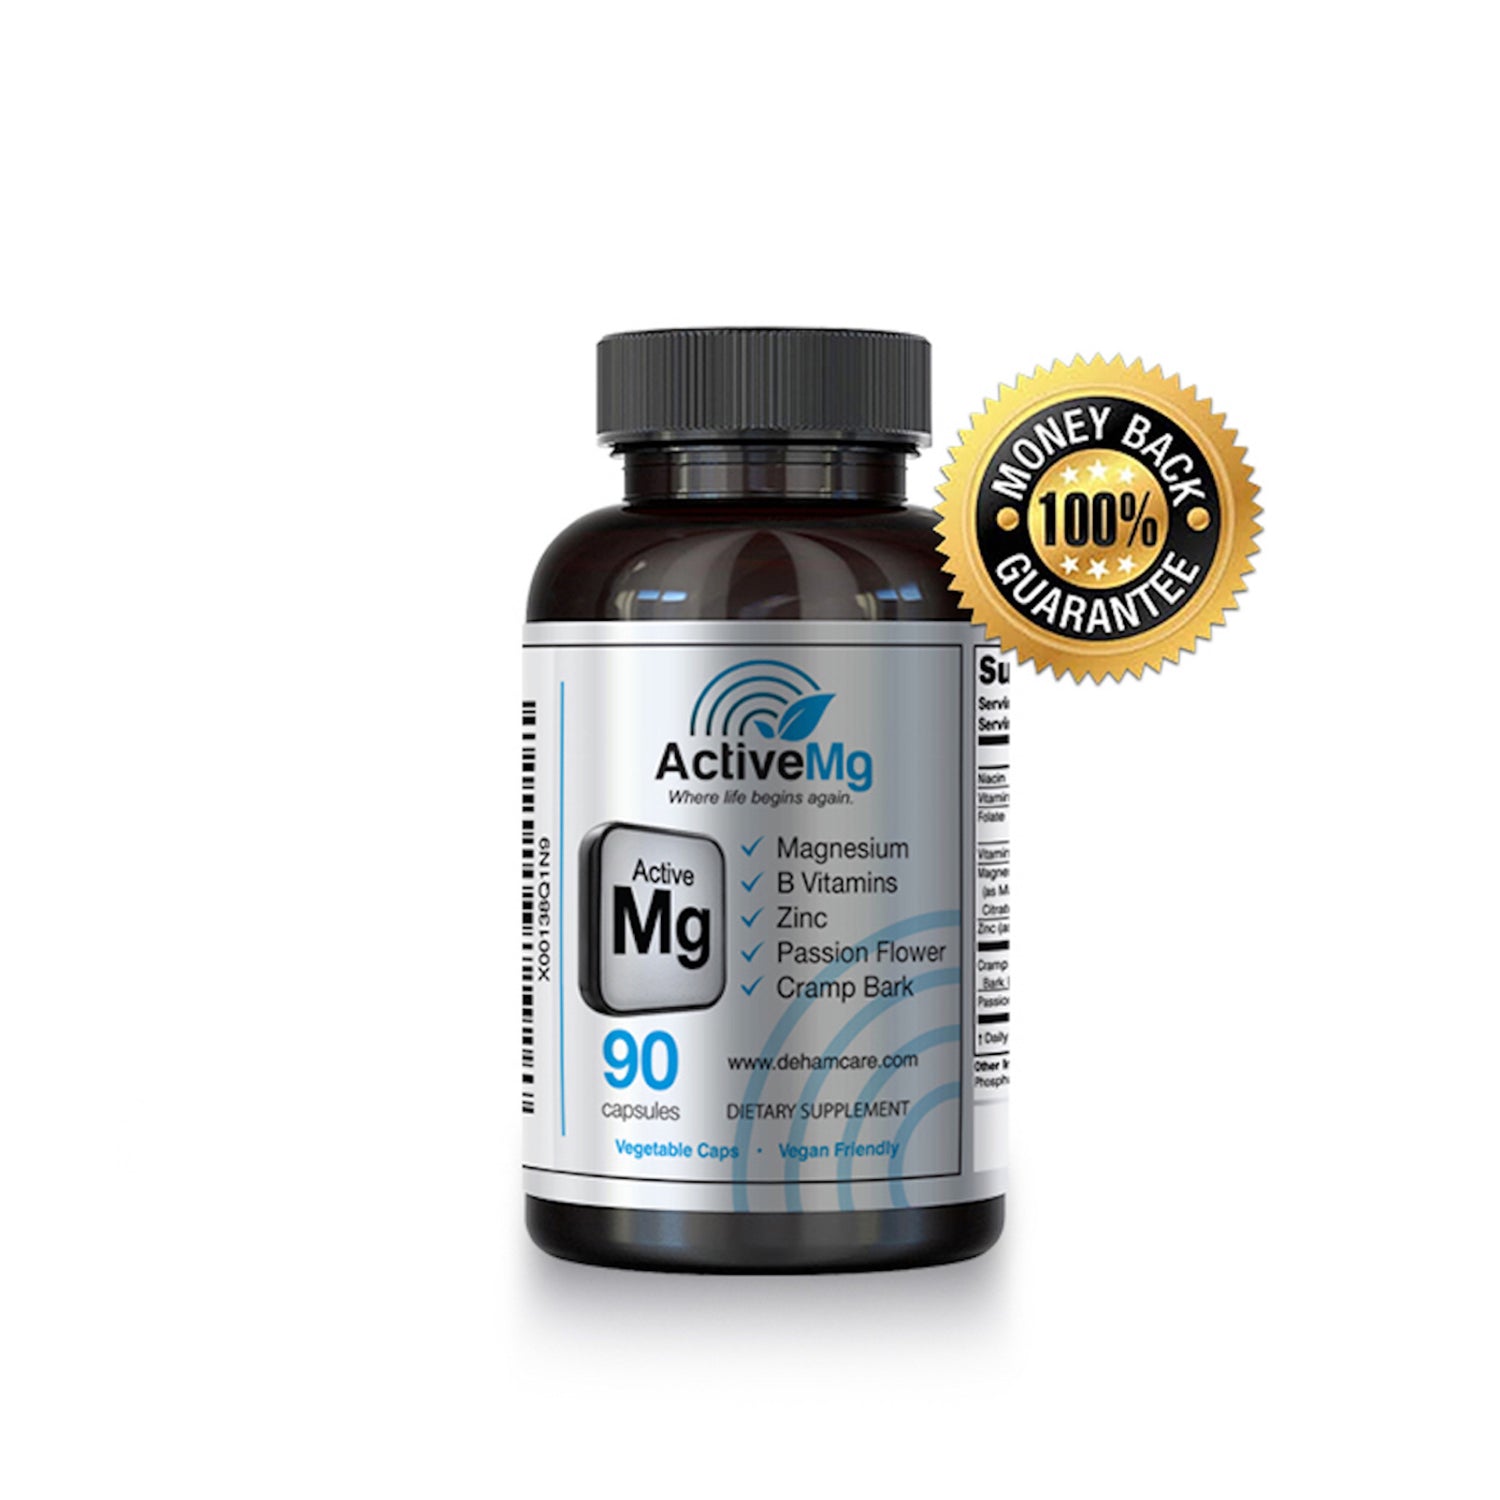 activemg - activated magnesium single bottle - 90 capsules